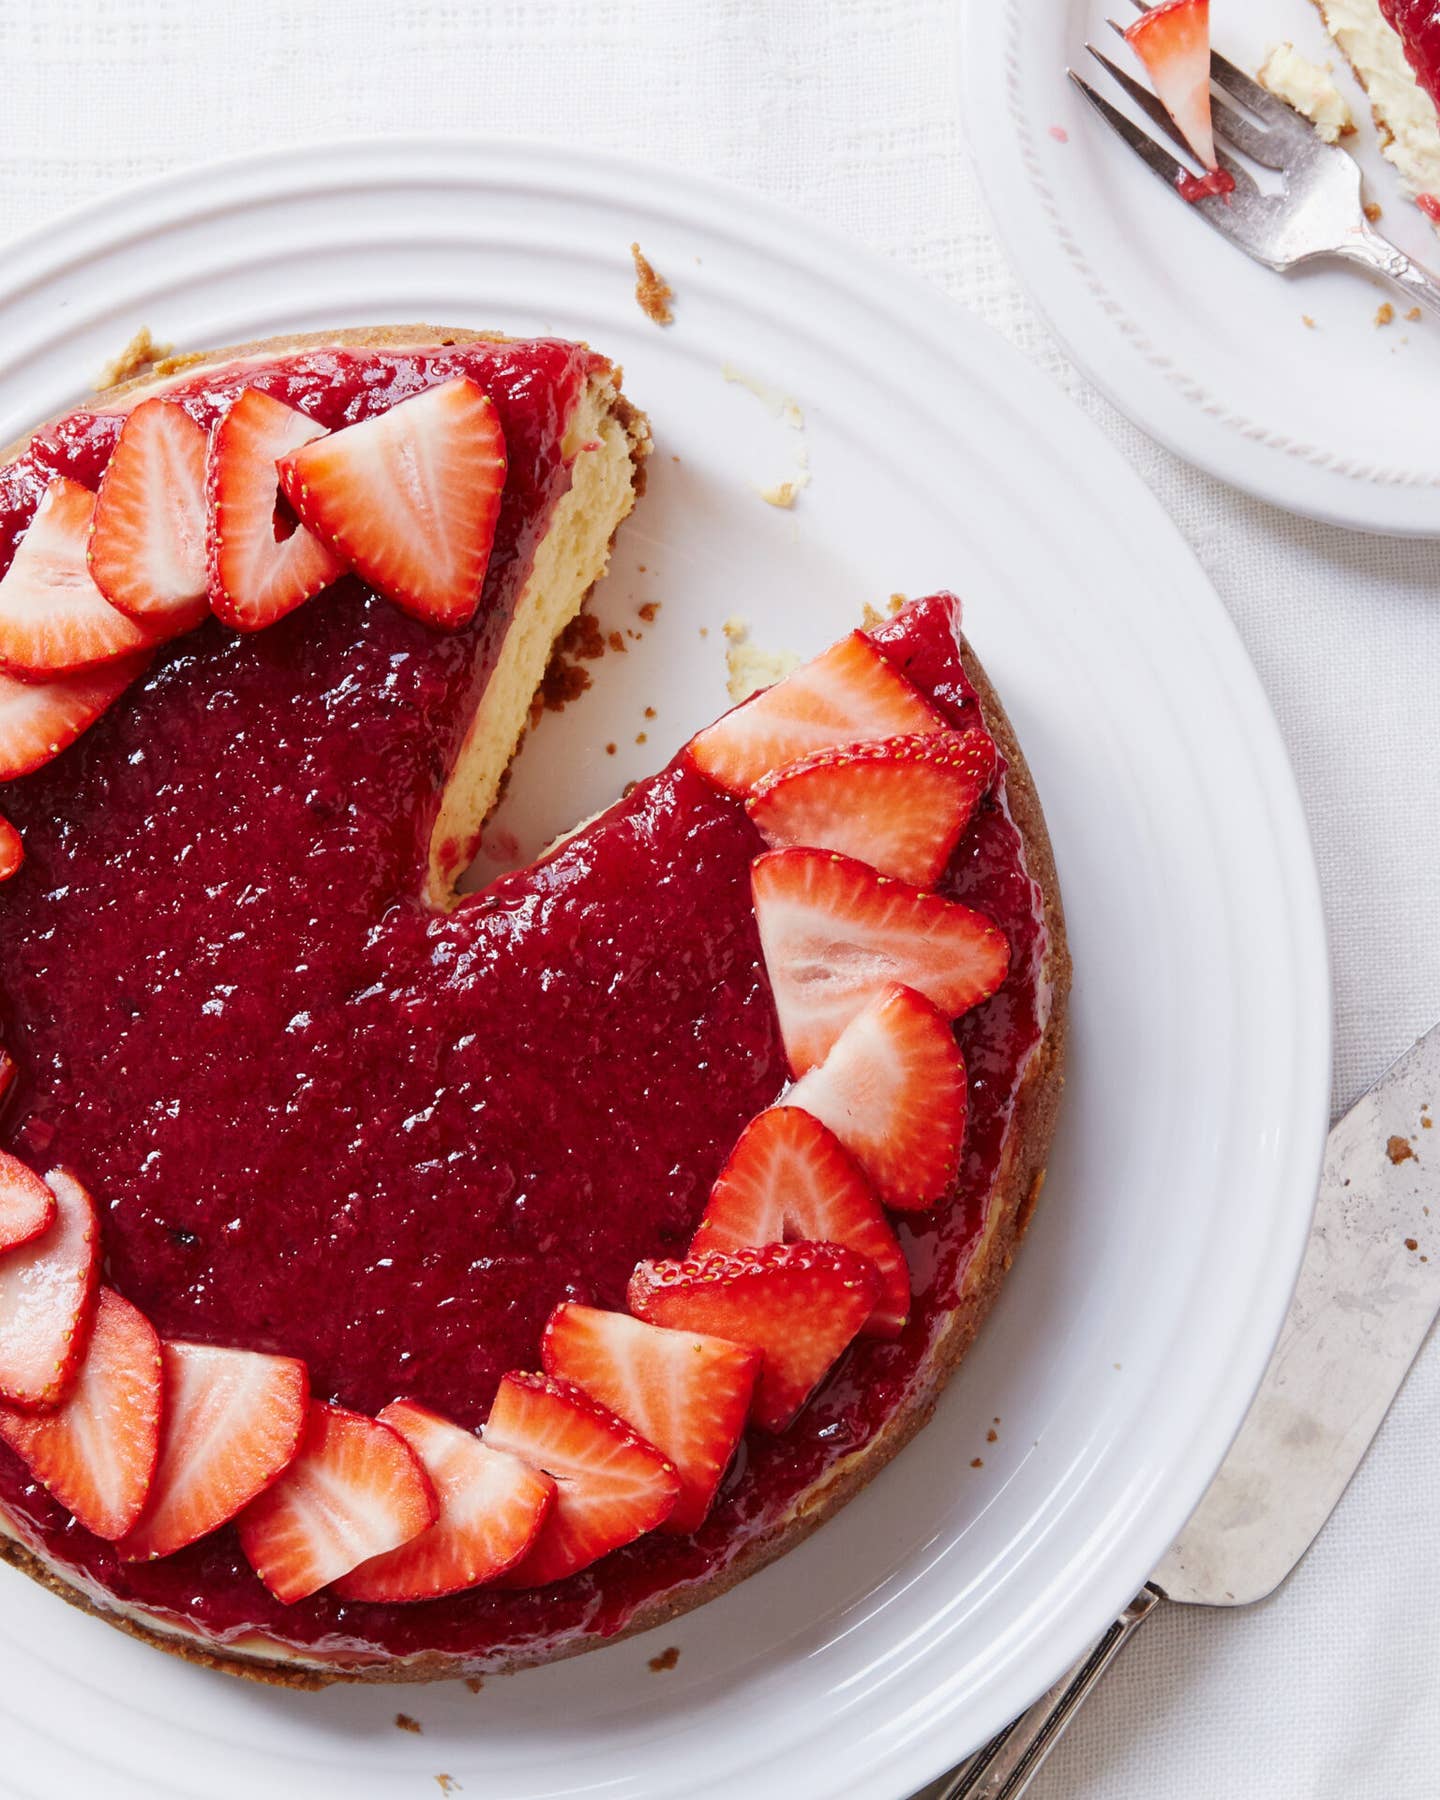 14 Strawberry Recipes to Sweeten Your Spring and Summer